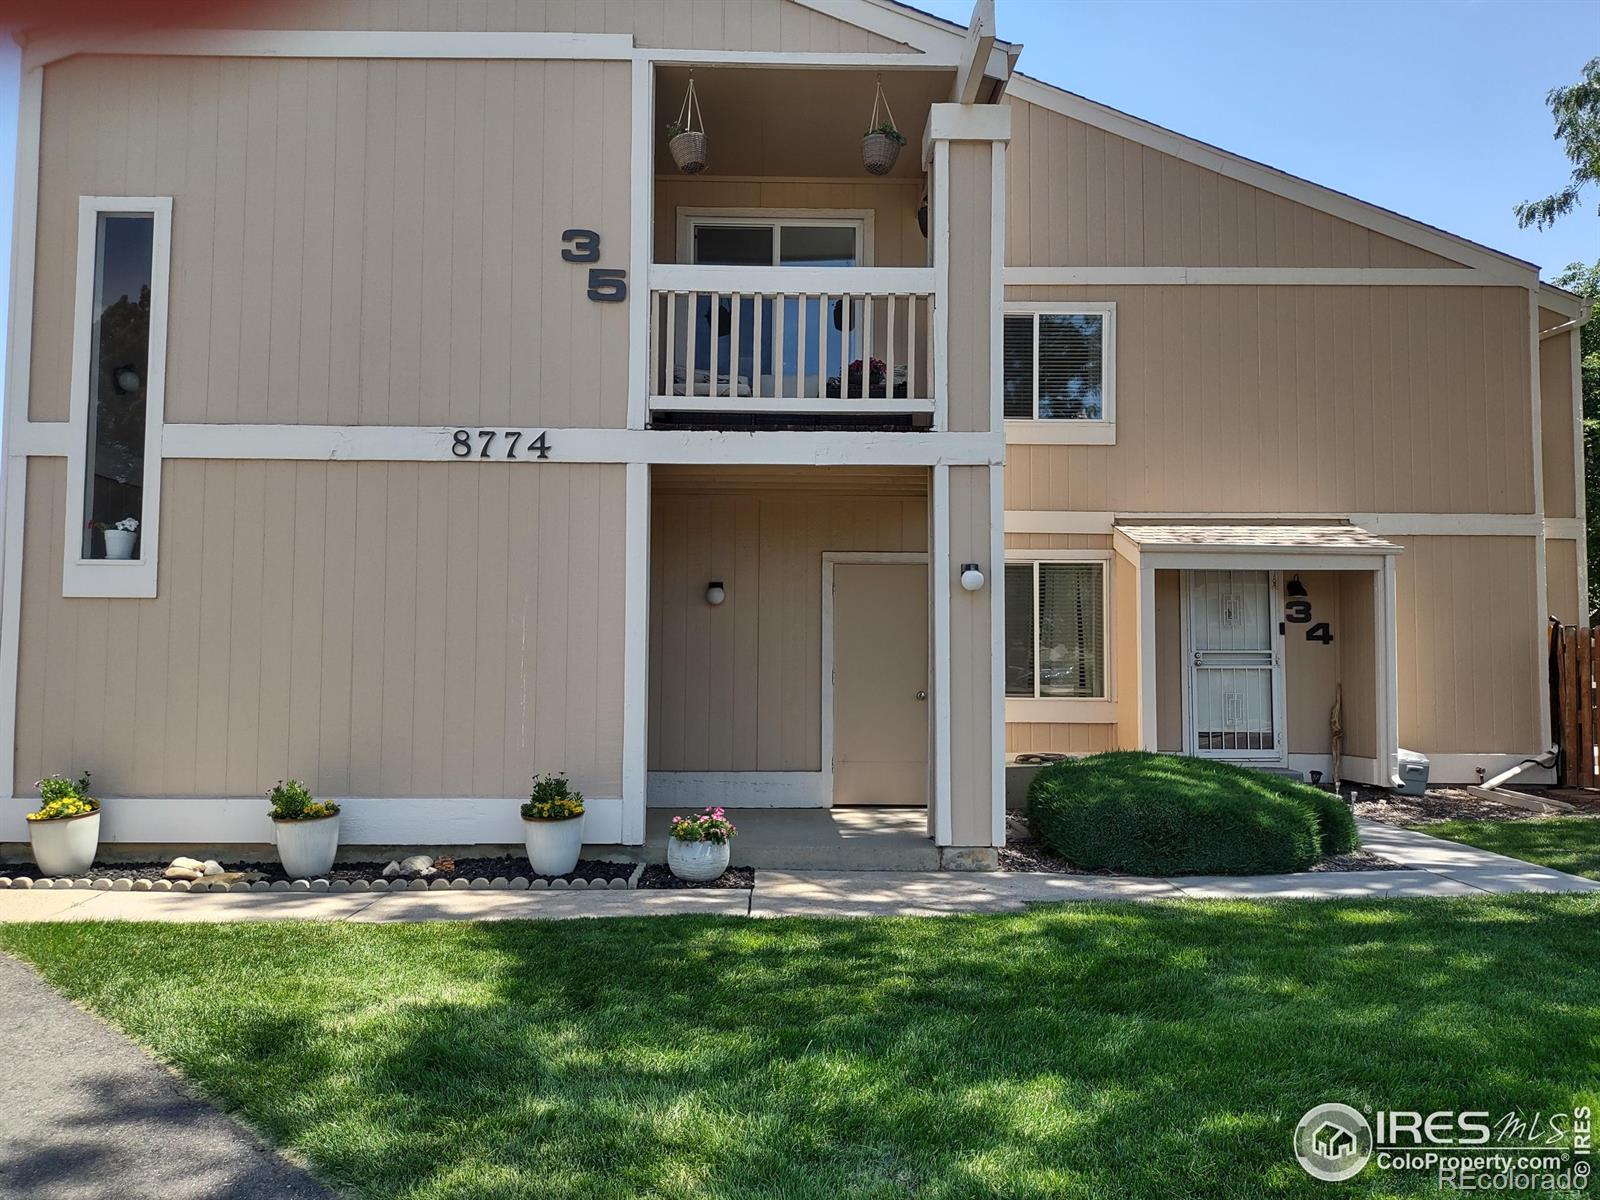 8774  Chase Drive, arvada MLS: 4567891013026 Beds: 2 Baths: 2 Price: $369,900